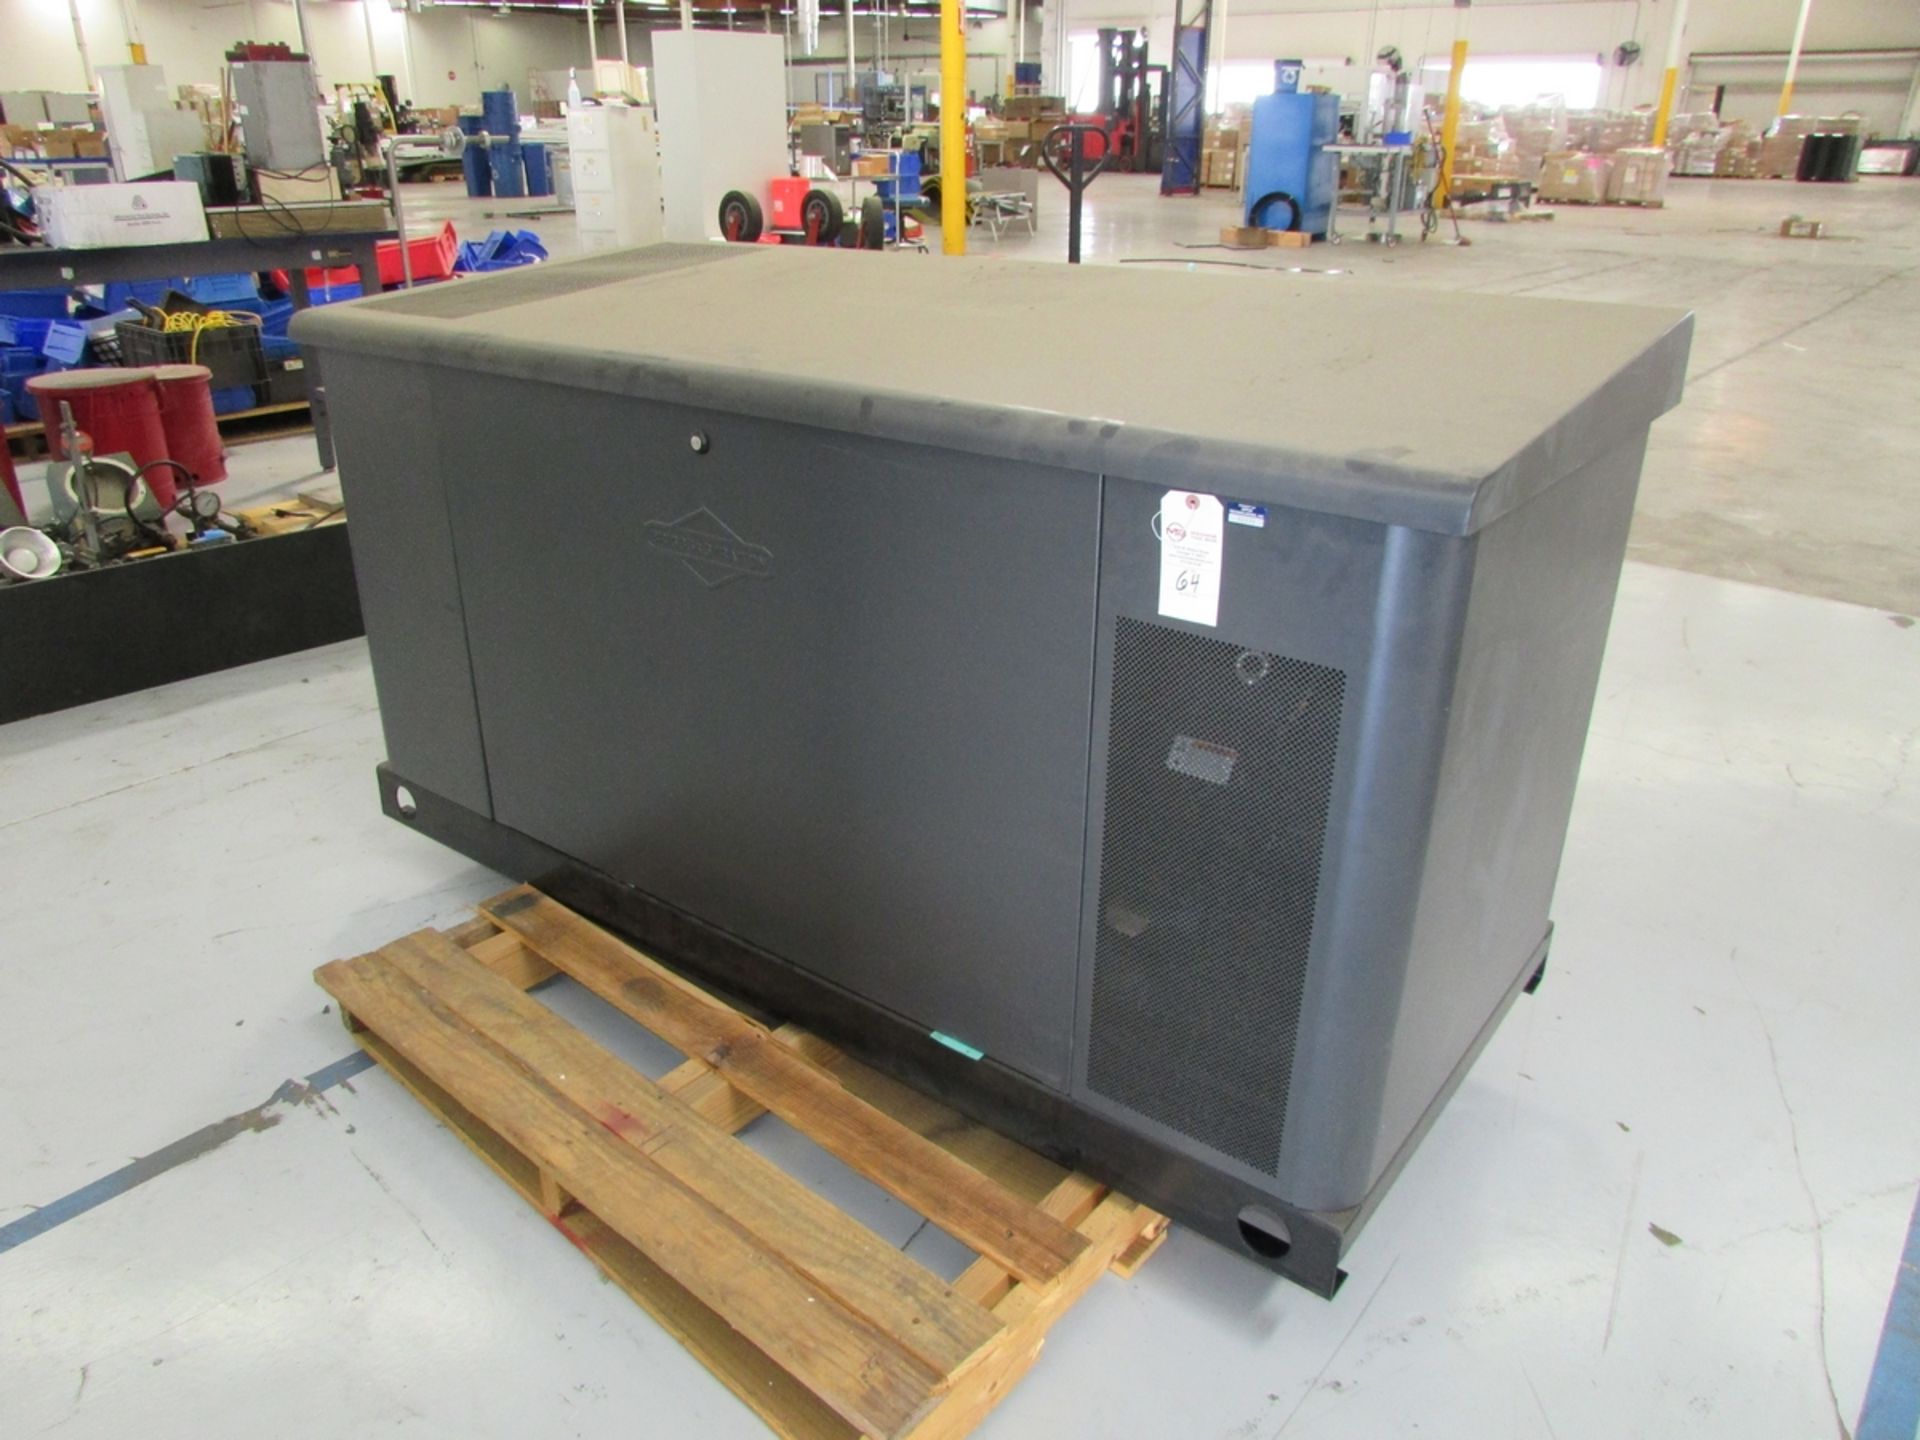 Briggs & Stratton 25-BSPP2-0 25Kw CNG/LPG Standby Generator (2013) - Image 2 of 36